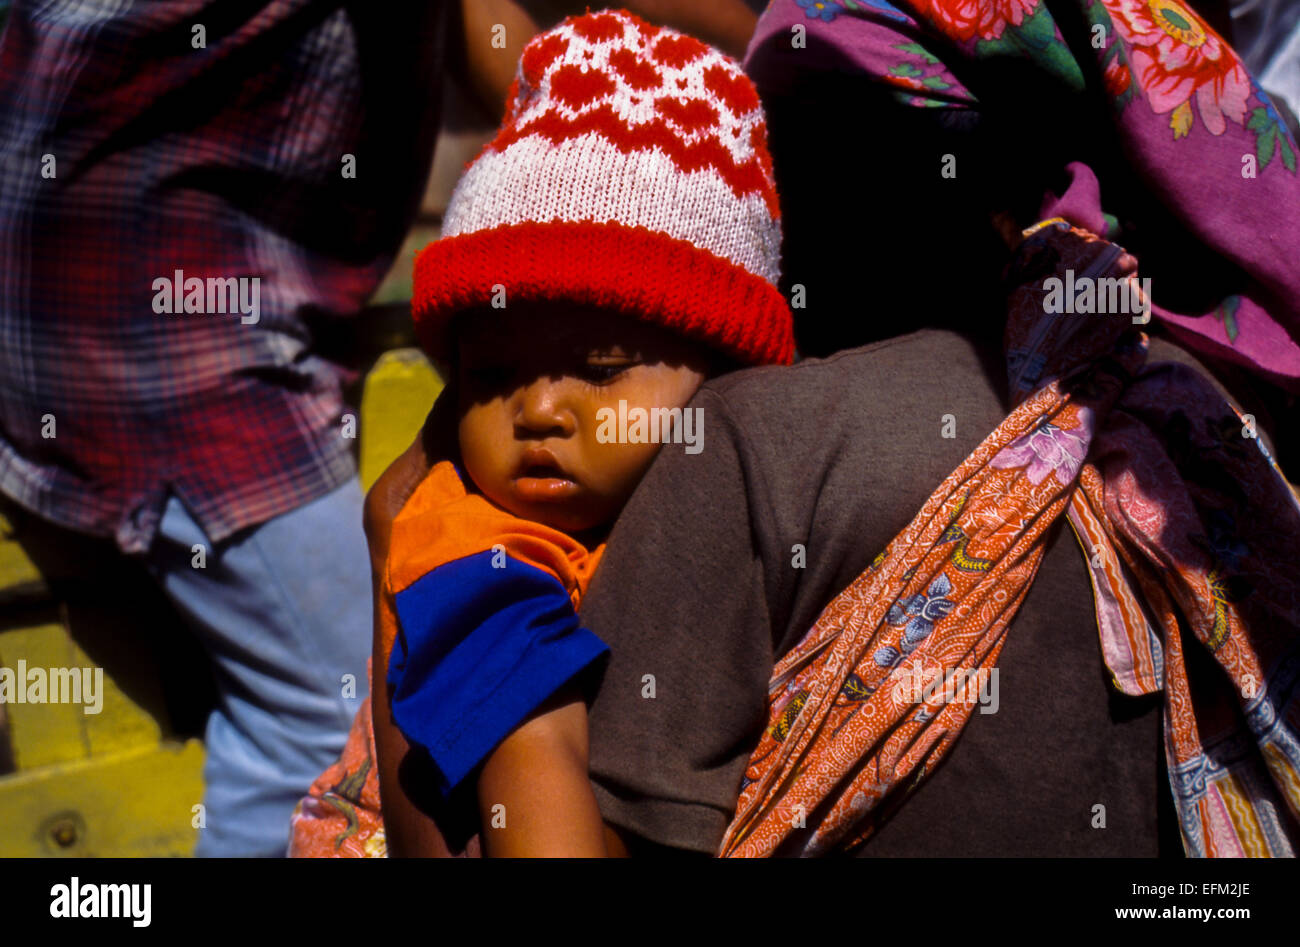 A baby sleeping on his mother's arm as they board a truck used as public transportation near Meru Betiri National Park, East Java, Indonesia. Stock Photo